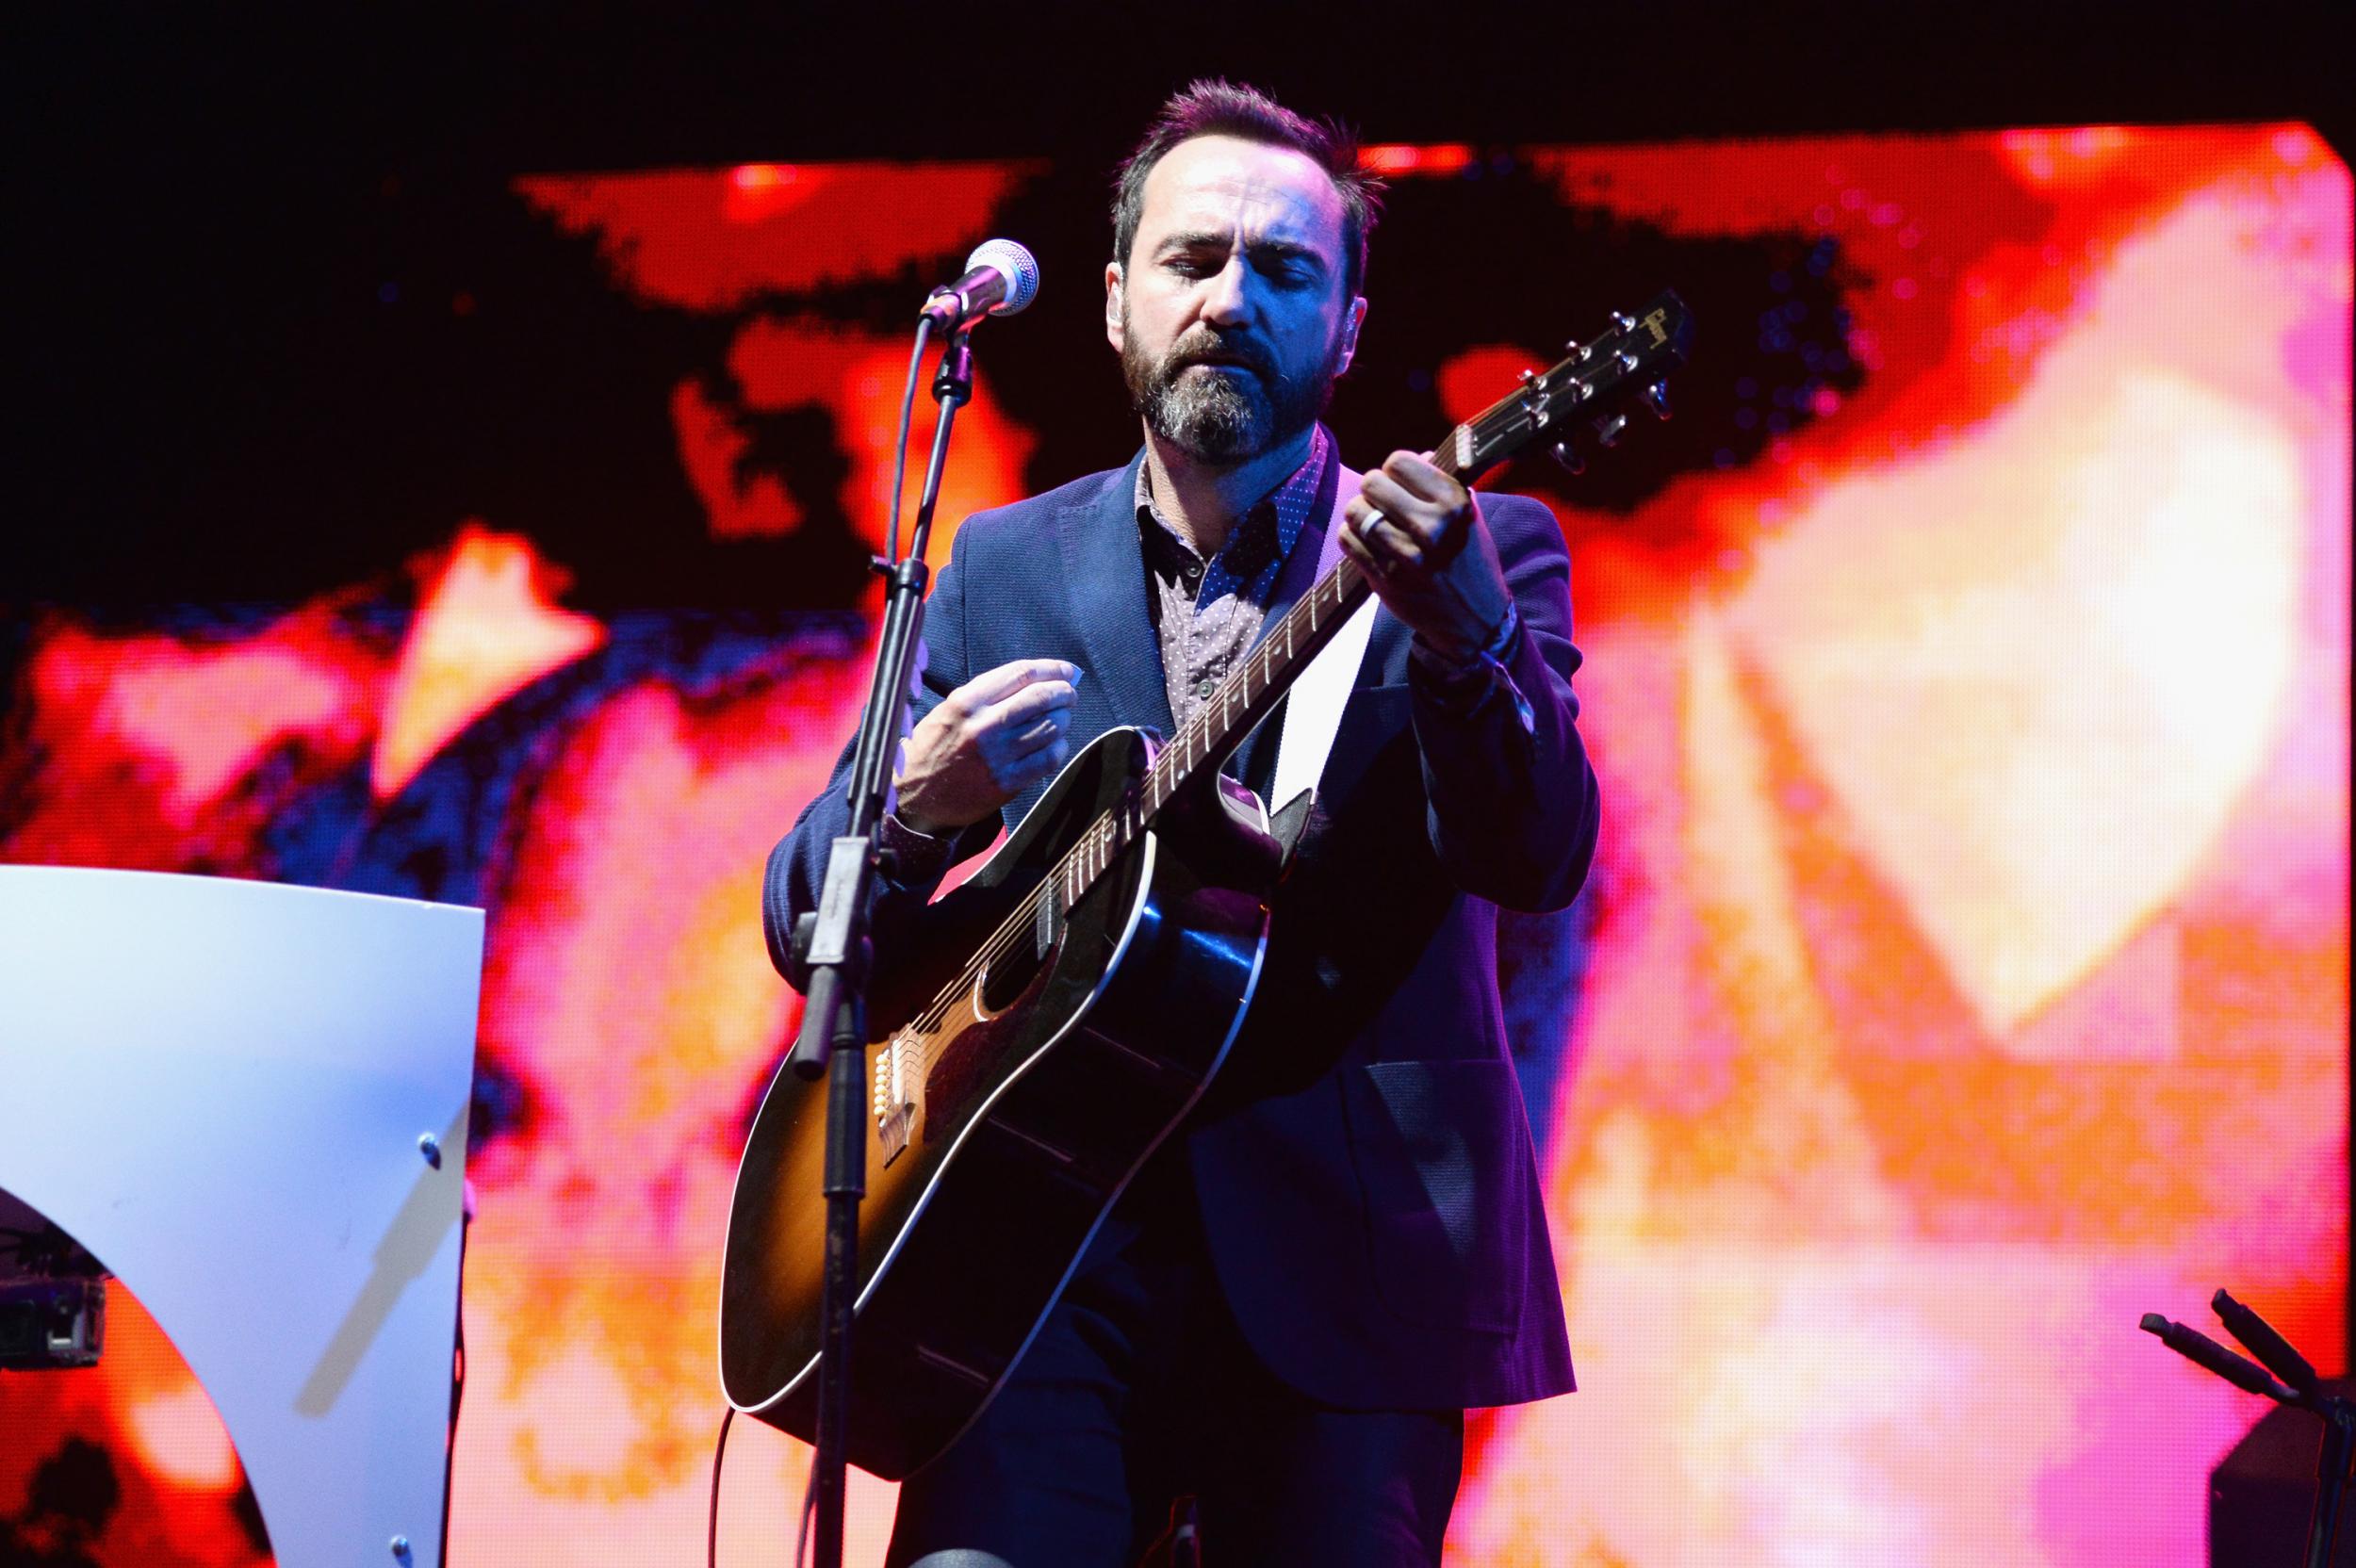 The Shins at Eventim Apollo, London, gig review: Deployed